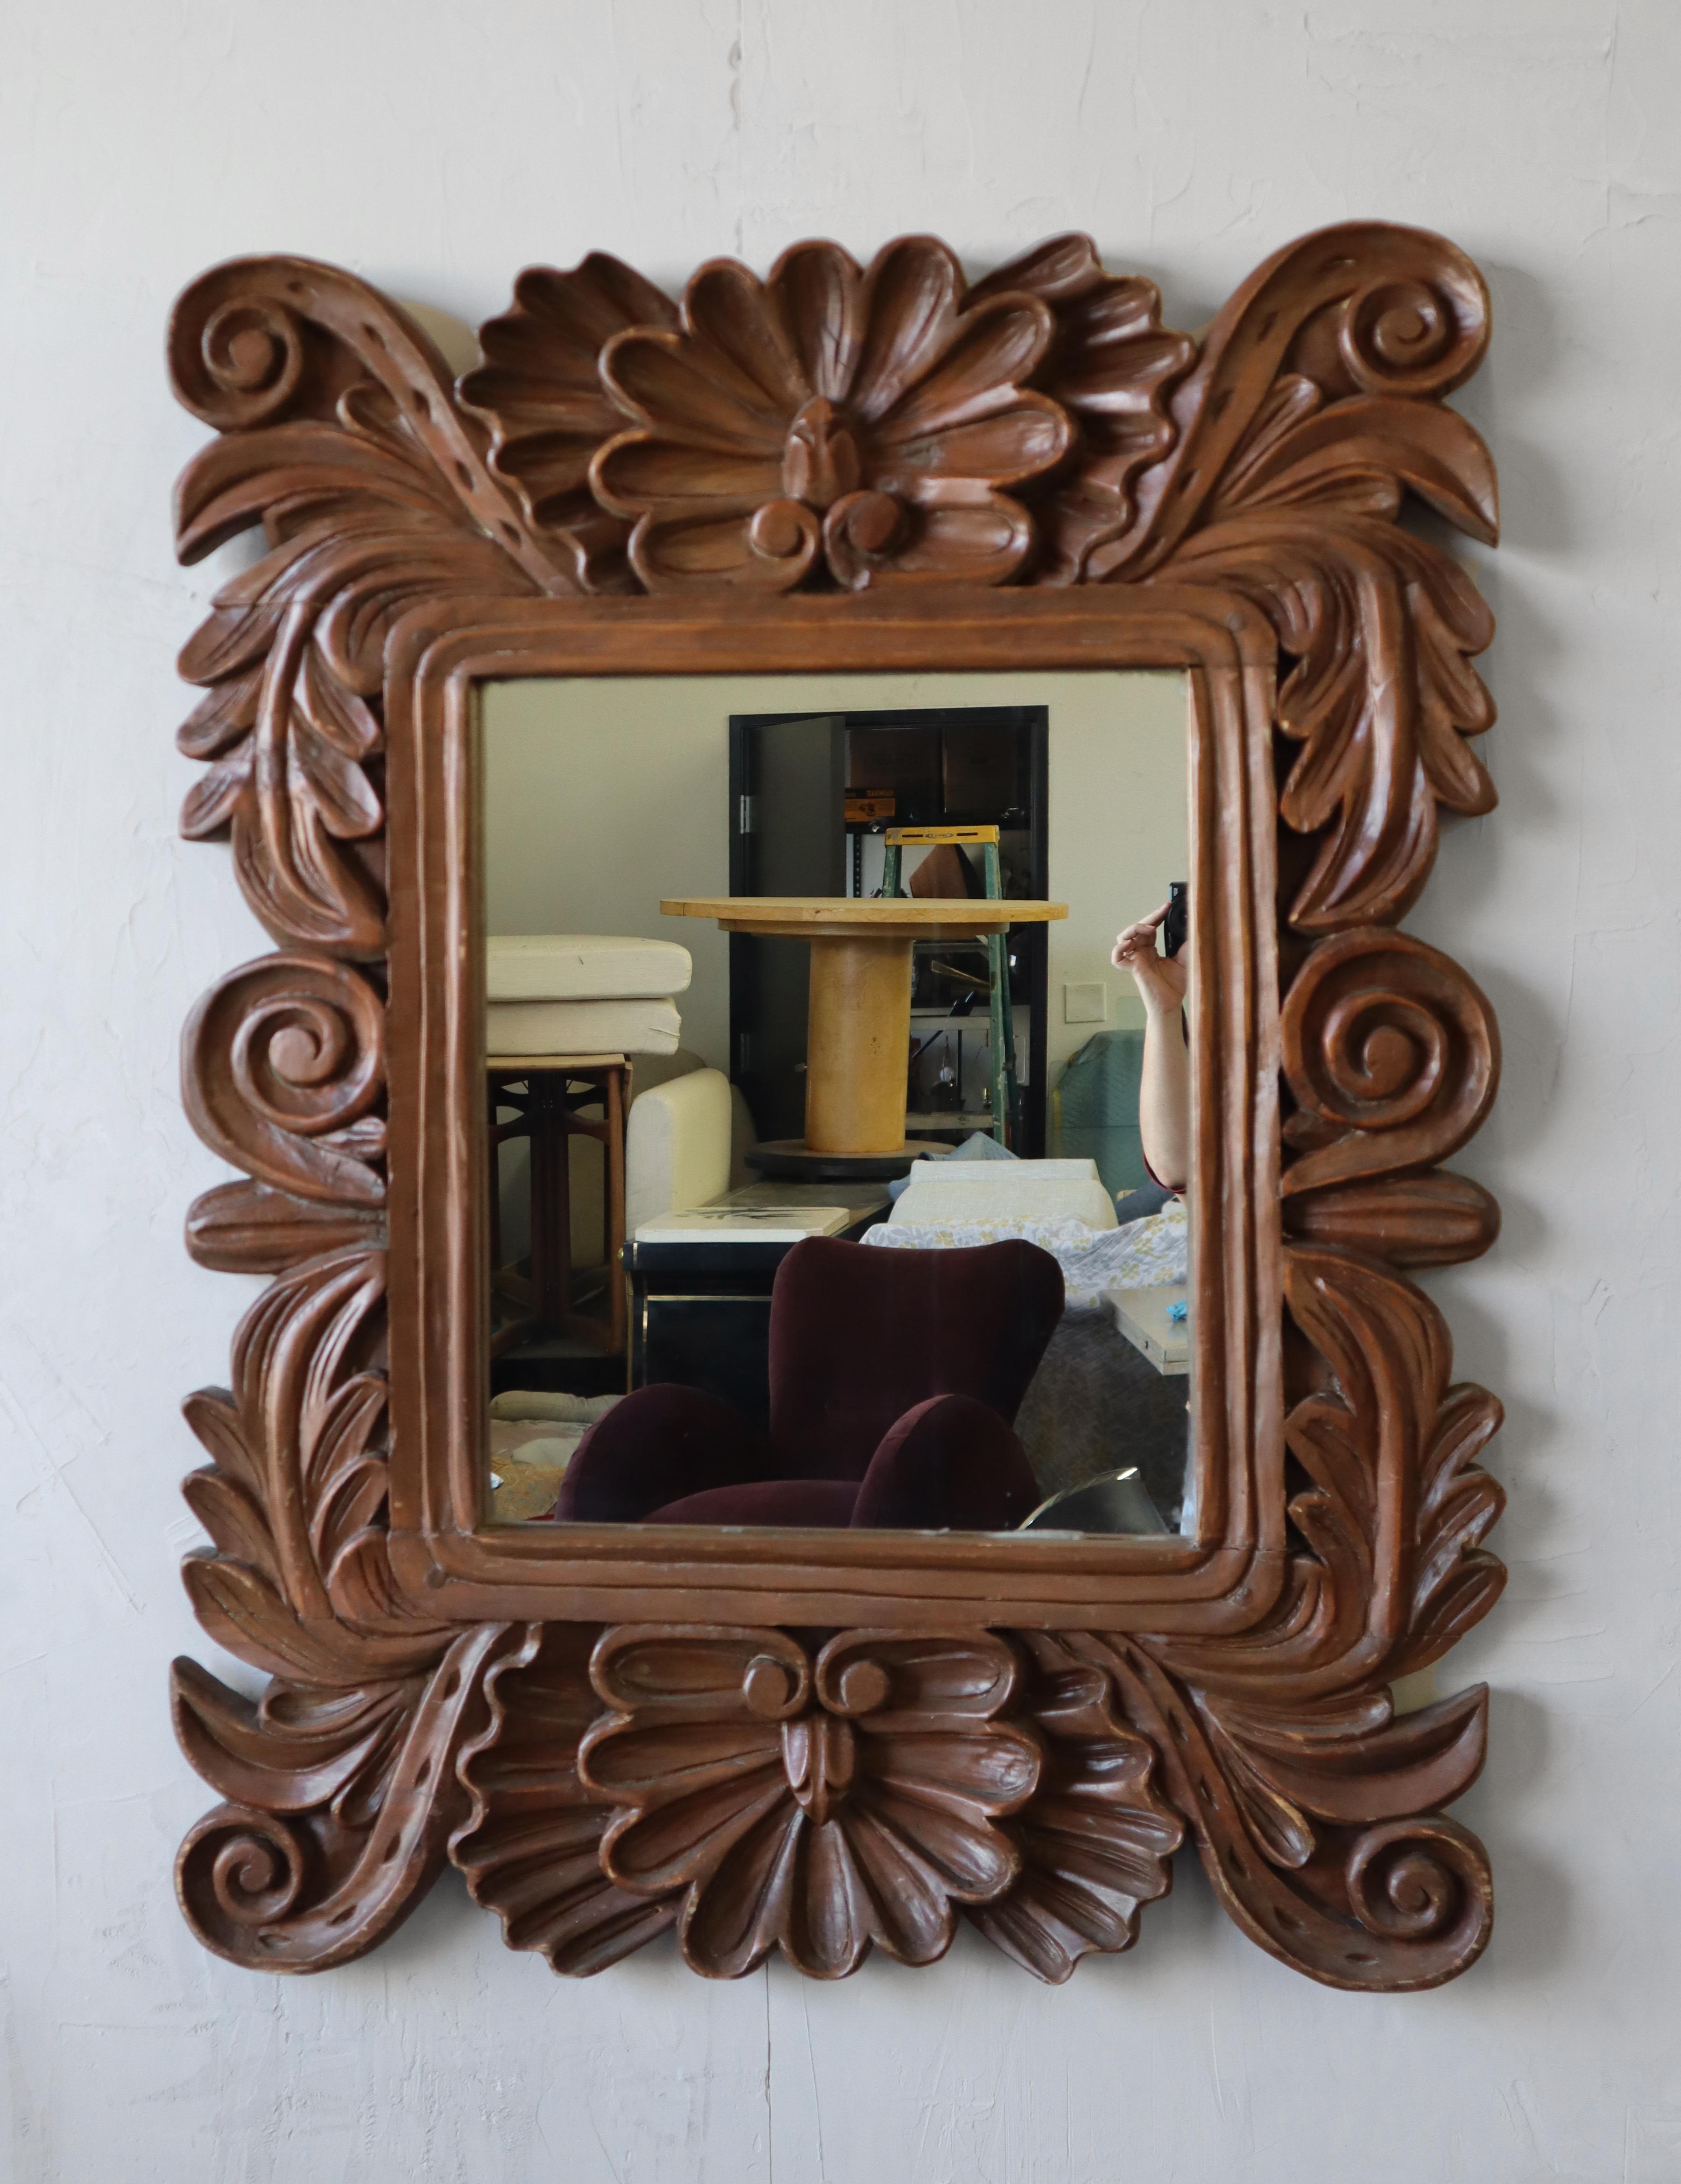 Large and beautiful antique, hand carved wood, filigree wall mirror. Super hand made details and patina, the depth of the carvings really create the most beautiful shadows.

Mirror and frame are in excellent antique condition.